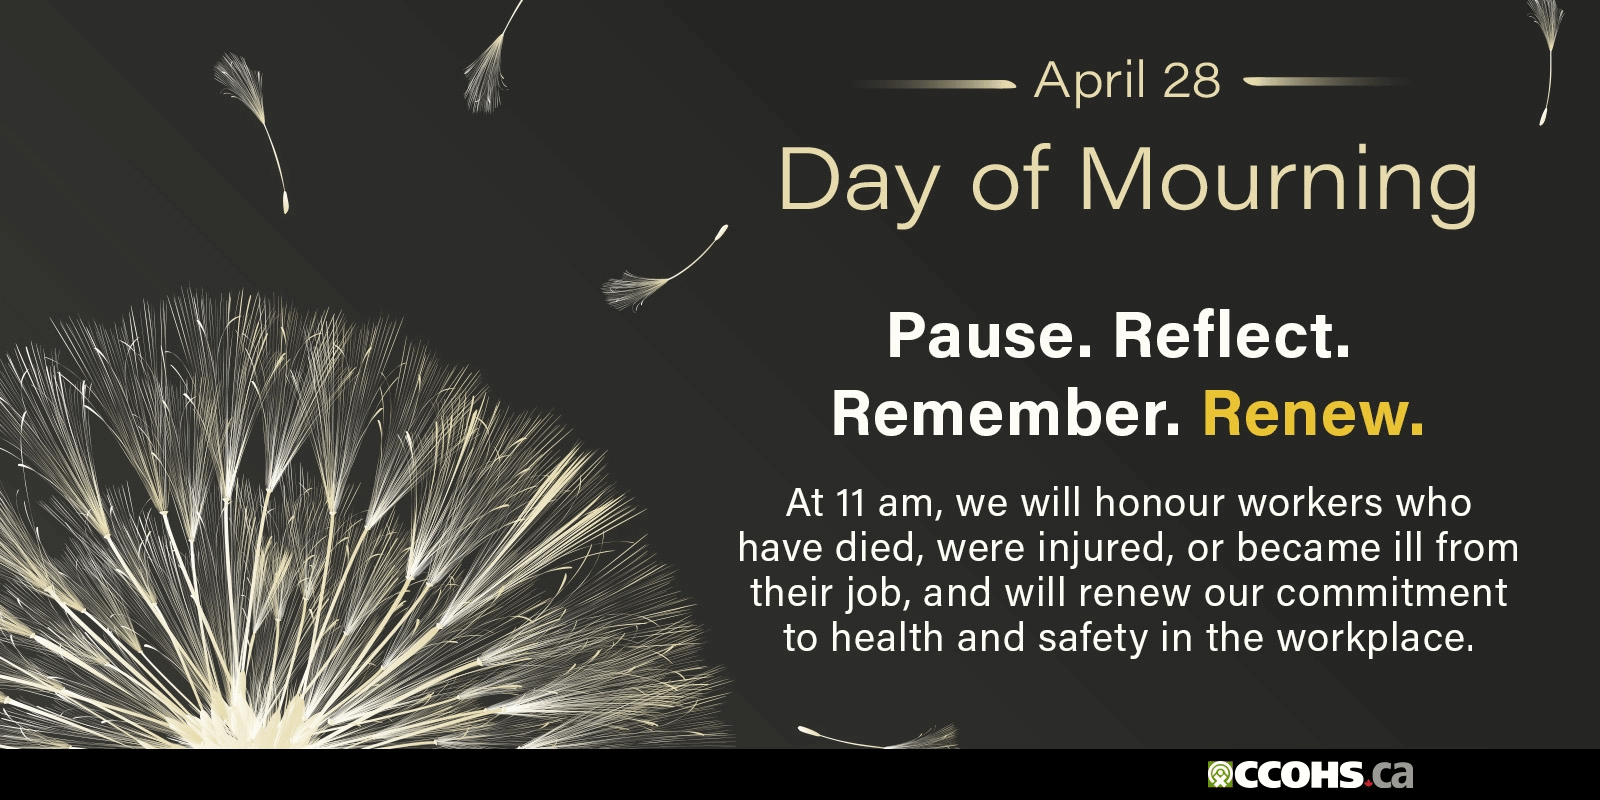 National Day of Mourning. At 11 a.m., we will honour workers who have died, were injured, or became ill from their job,
      and will renew our commitment to health and safety in the workplace. Pause. Reflect. Remember. Renew.